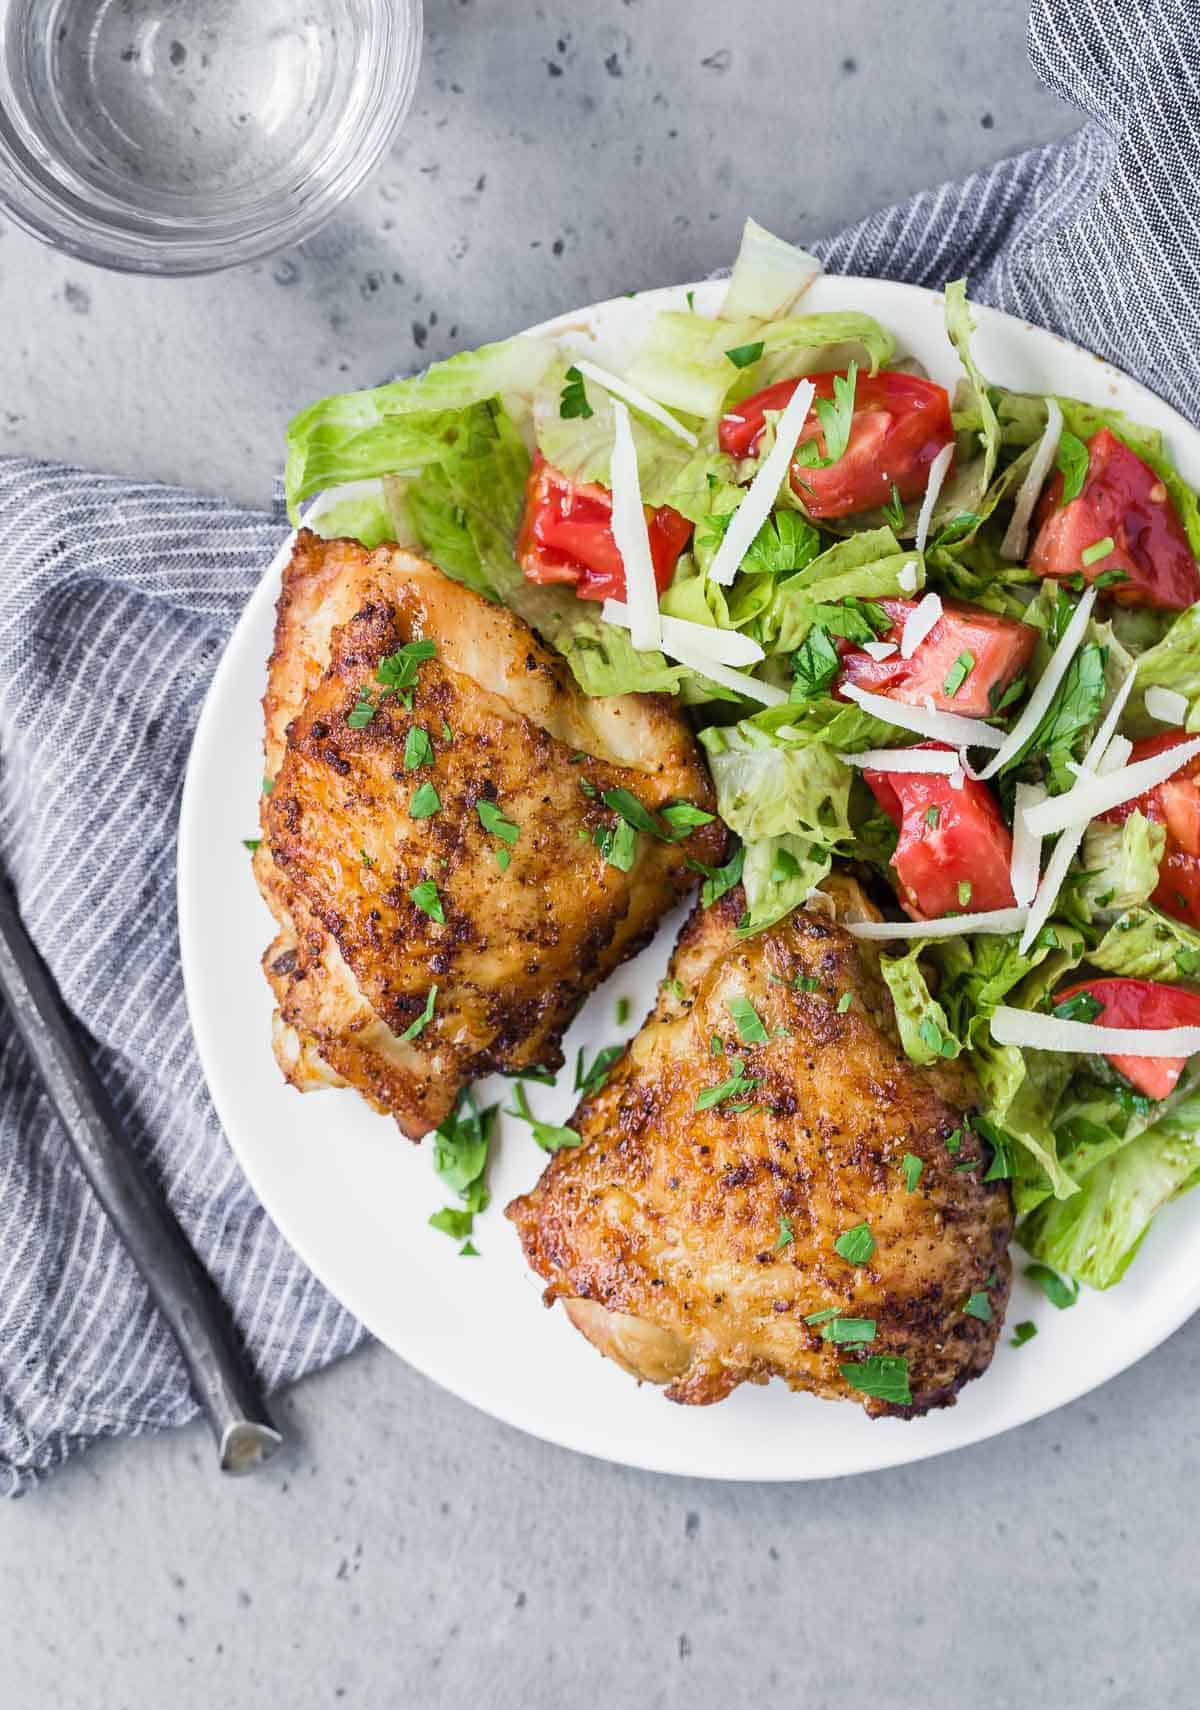 Overhead view of two chicken thighs on a plate with a tossed salad.